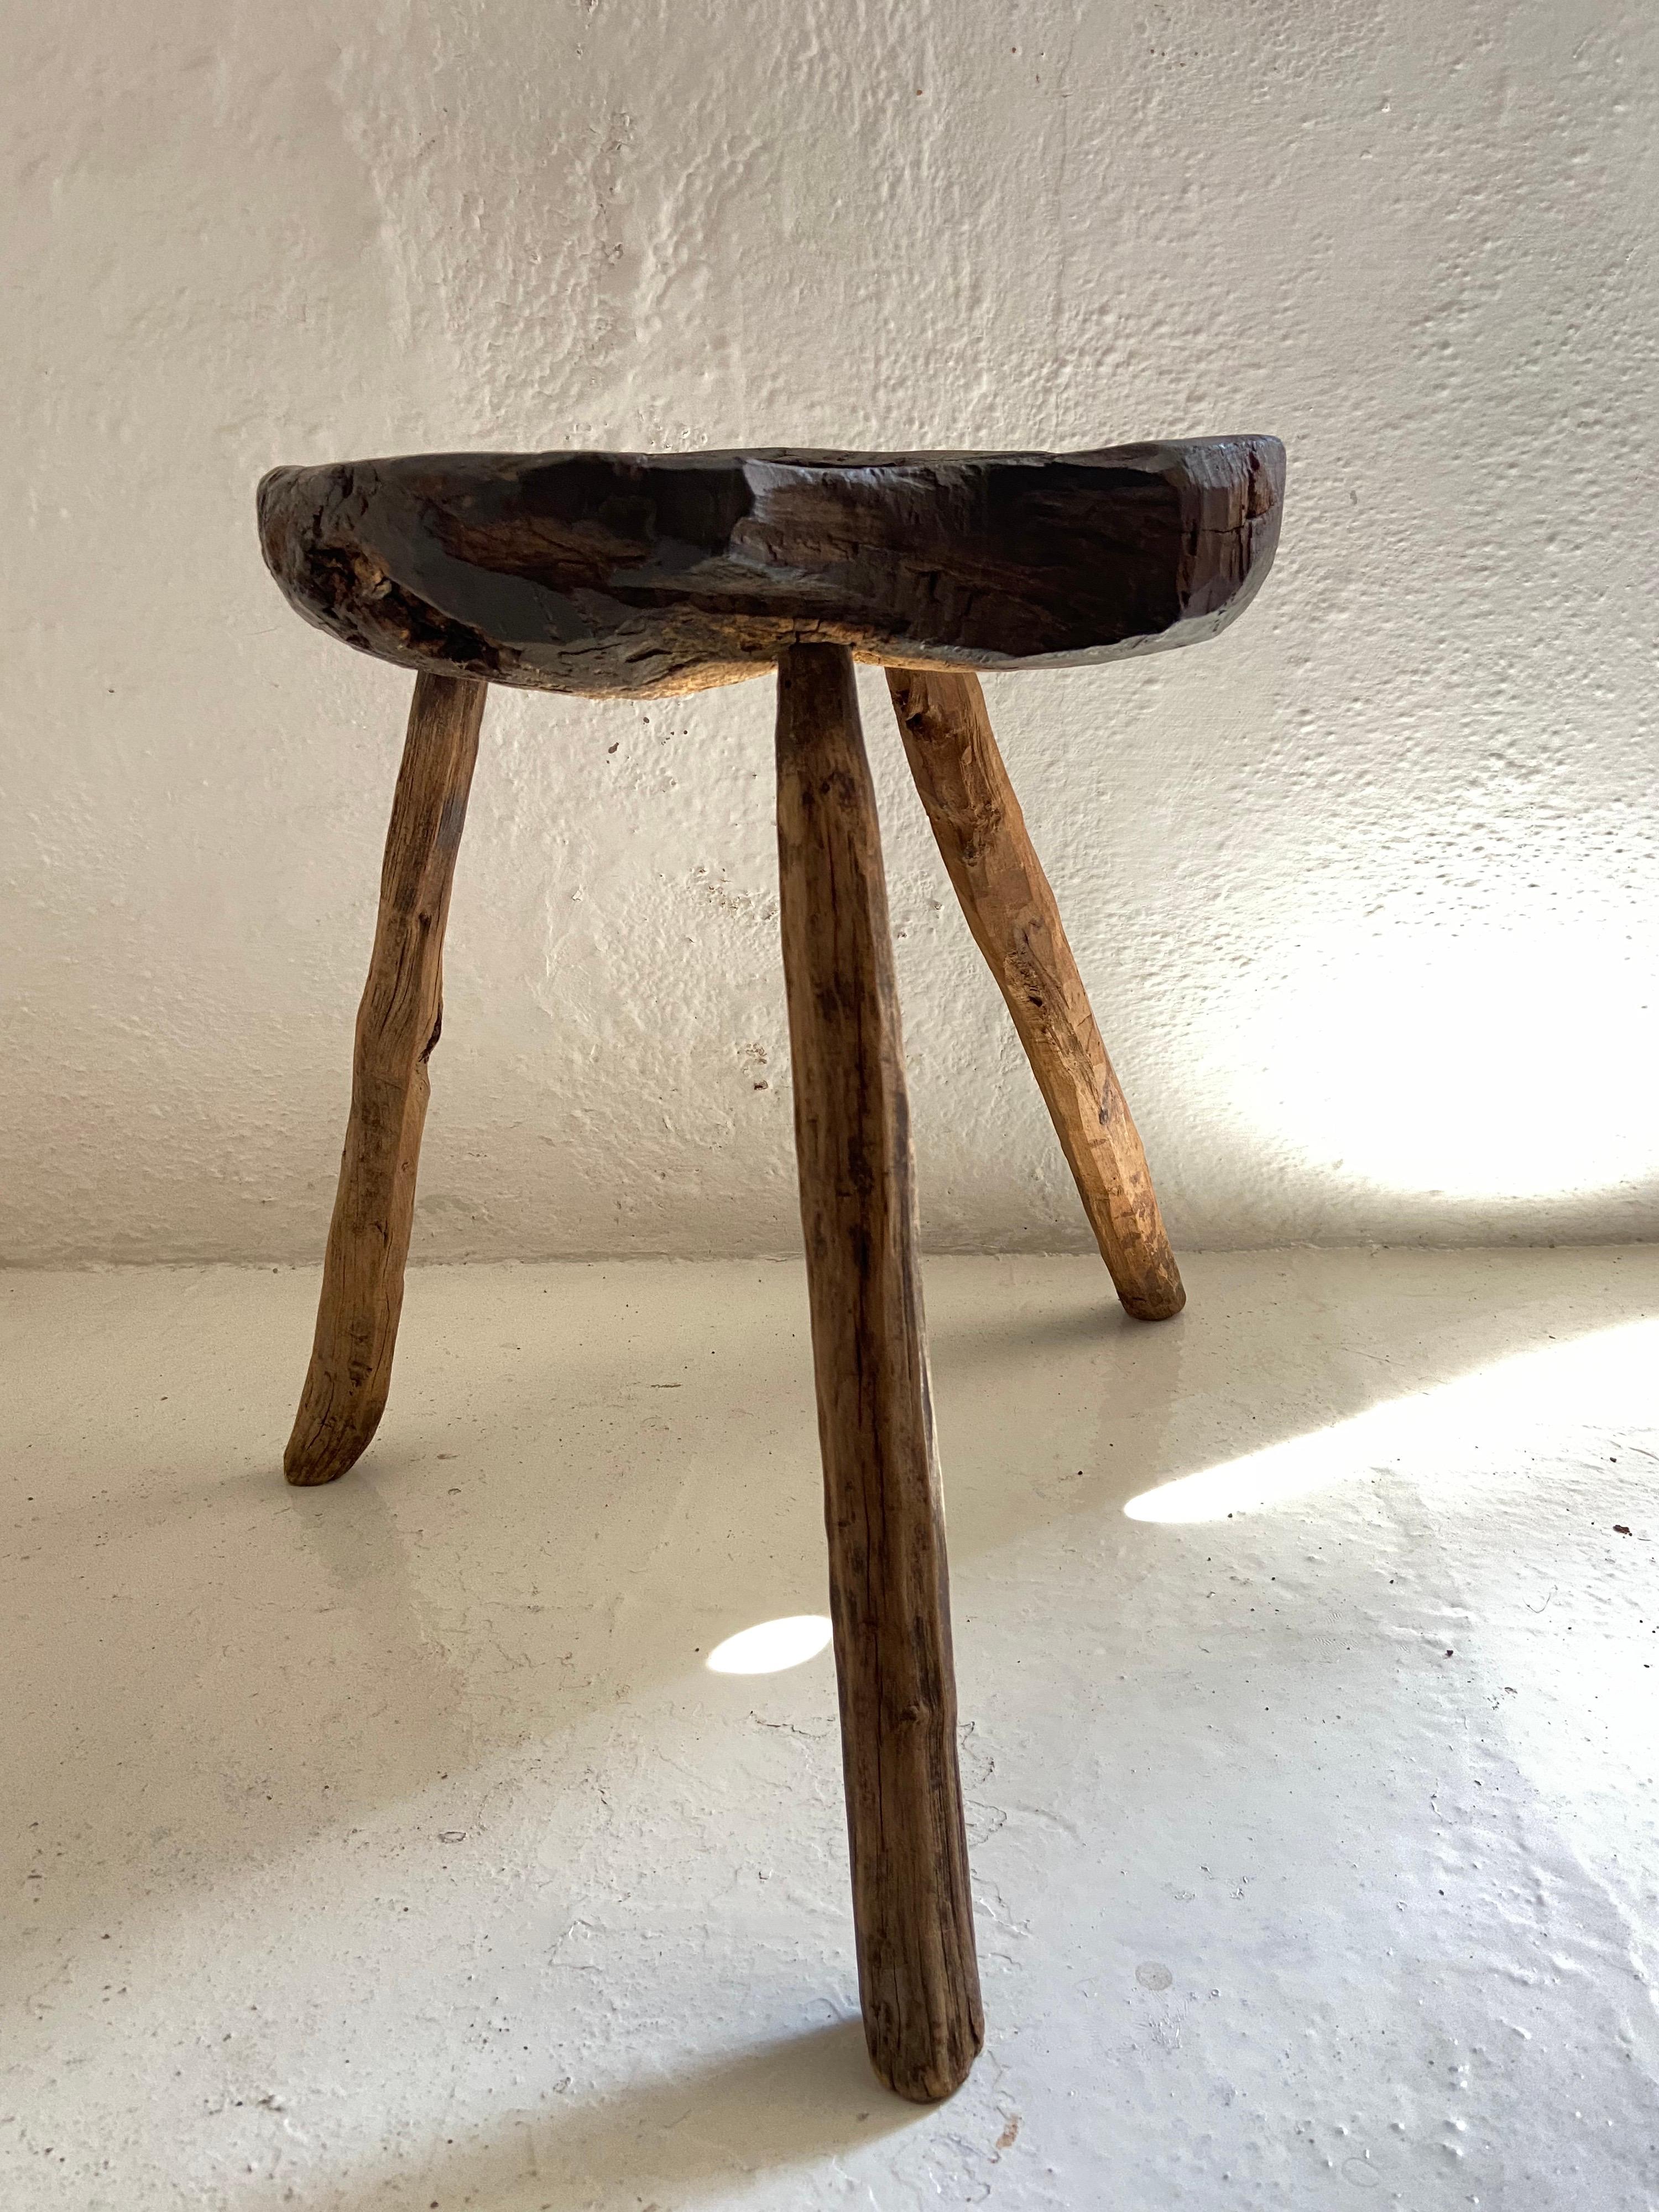 19th century hardwood stool from San Luis Potosí, Mexico. This piece is primitive in style. Much wear is evident throughout the seat. All original legs. Rare piece.